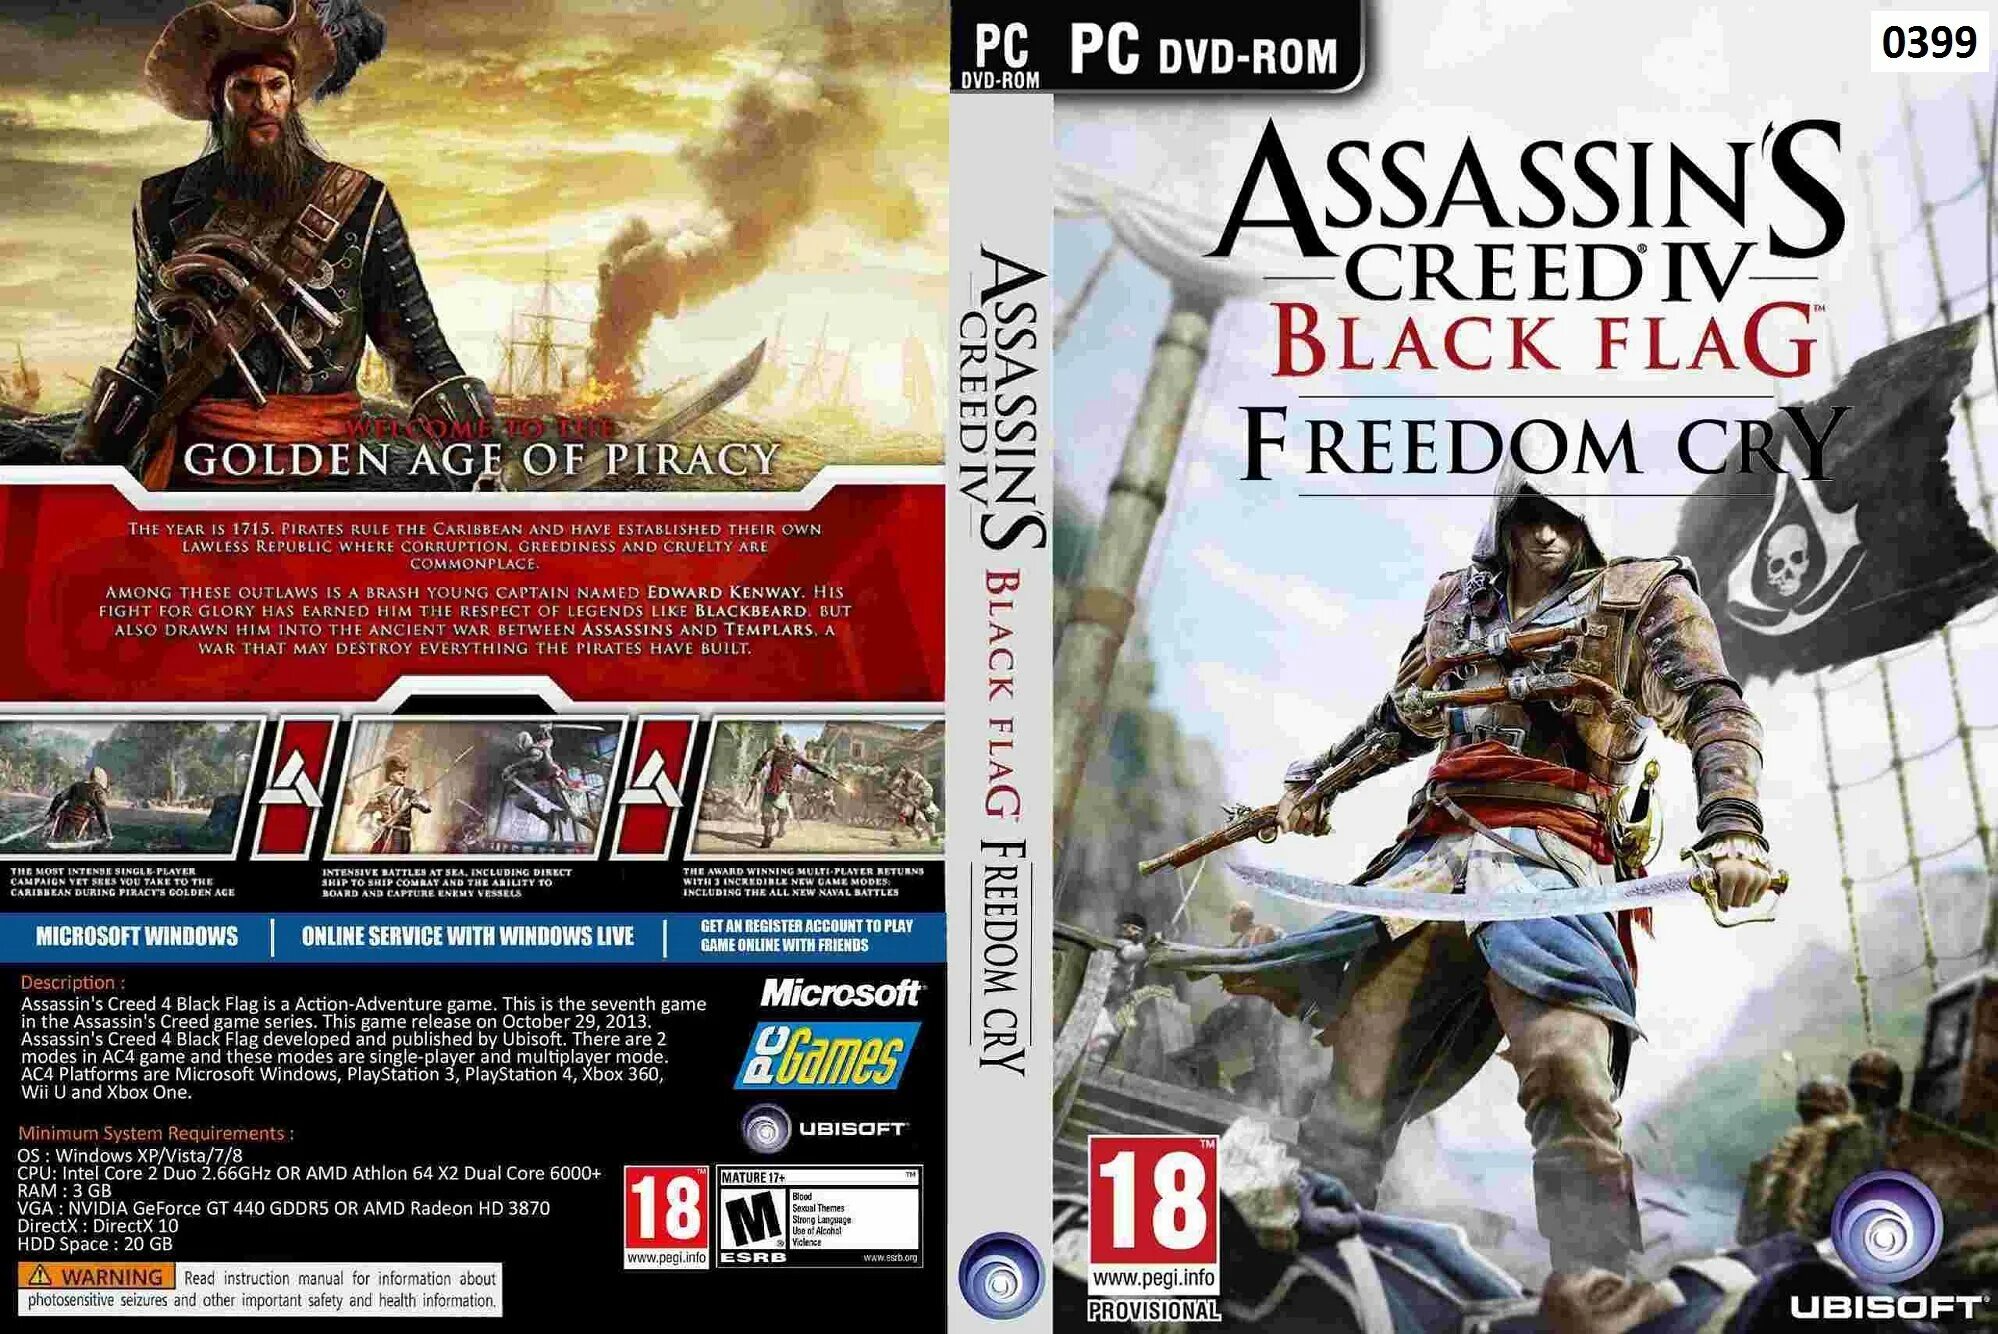 Assassins Creed 4 ps3 обложка. Диск ассасин Крид 2 ps3. Assassins Creed 2 Xbox 360 пиратский диск. Ассасин Крид 3 диск. Assassin s nintendo